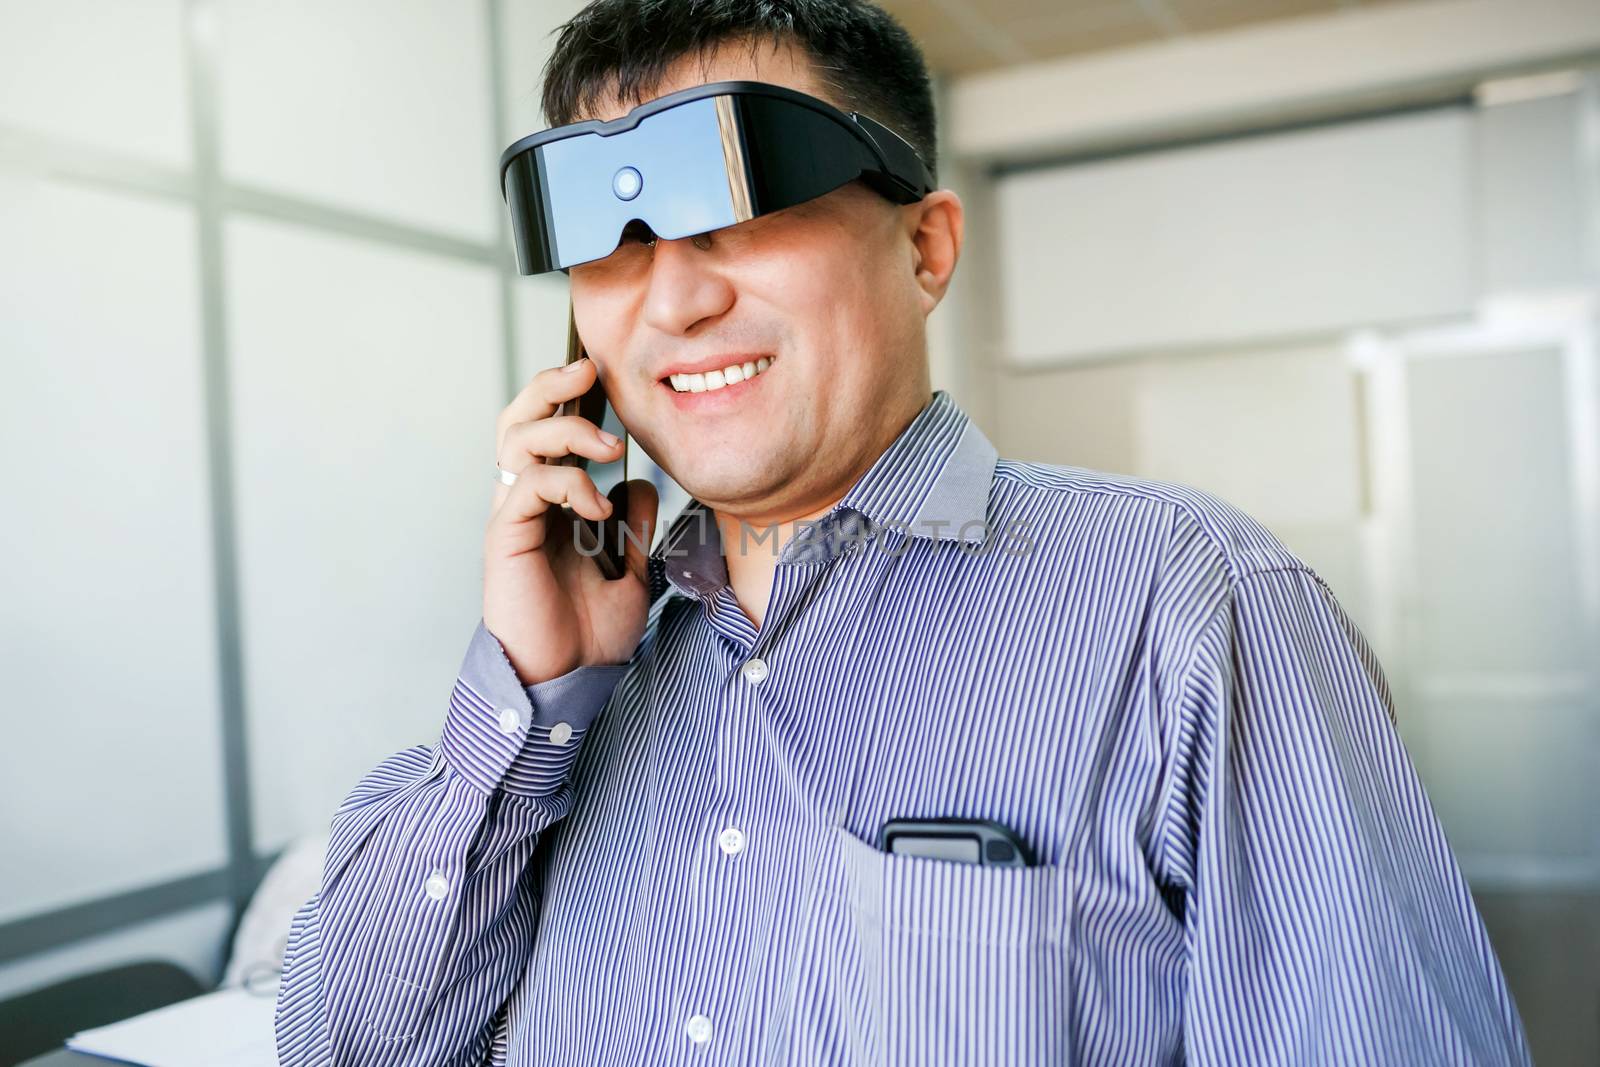 Man in virtual reality glasses talking on phone  by Maynagashev